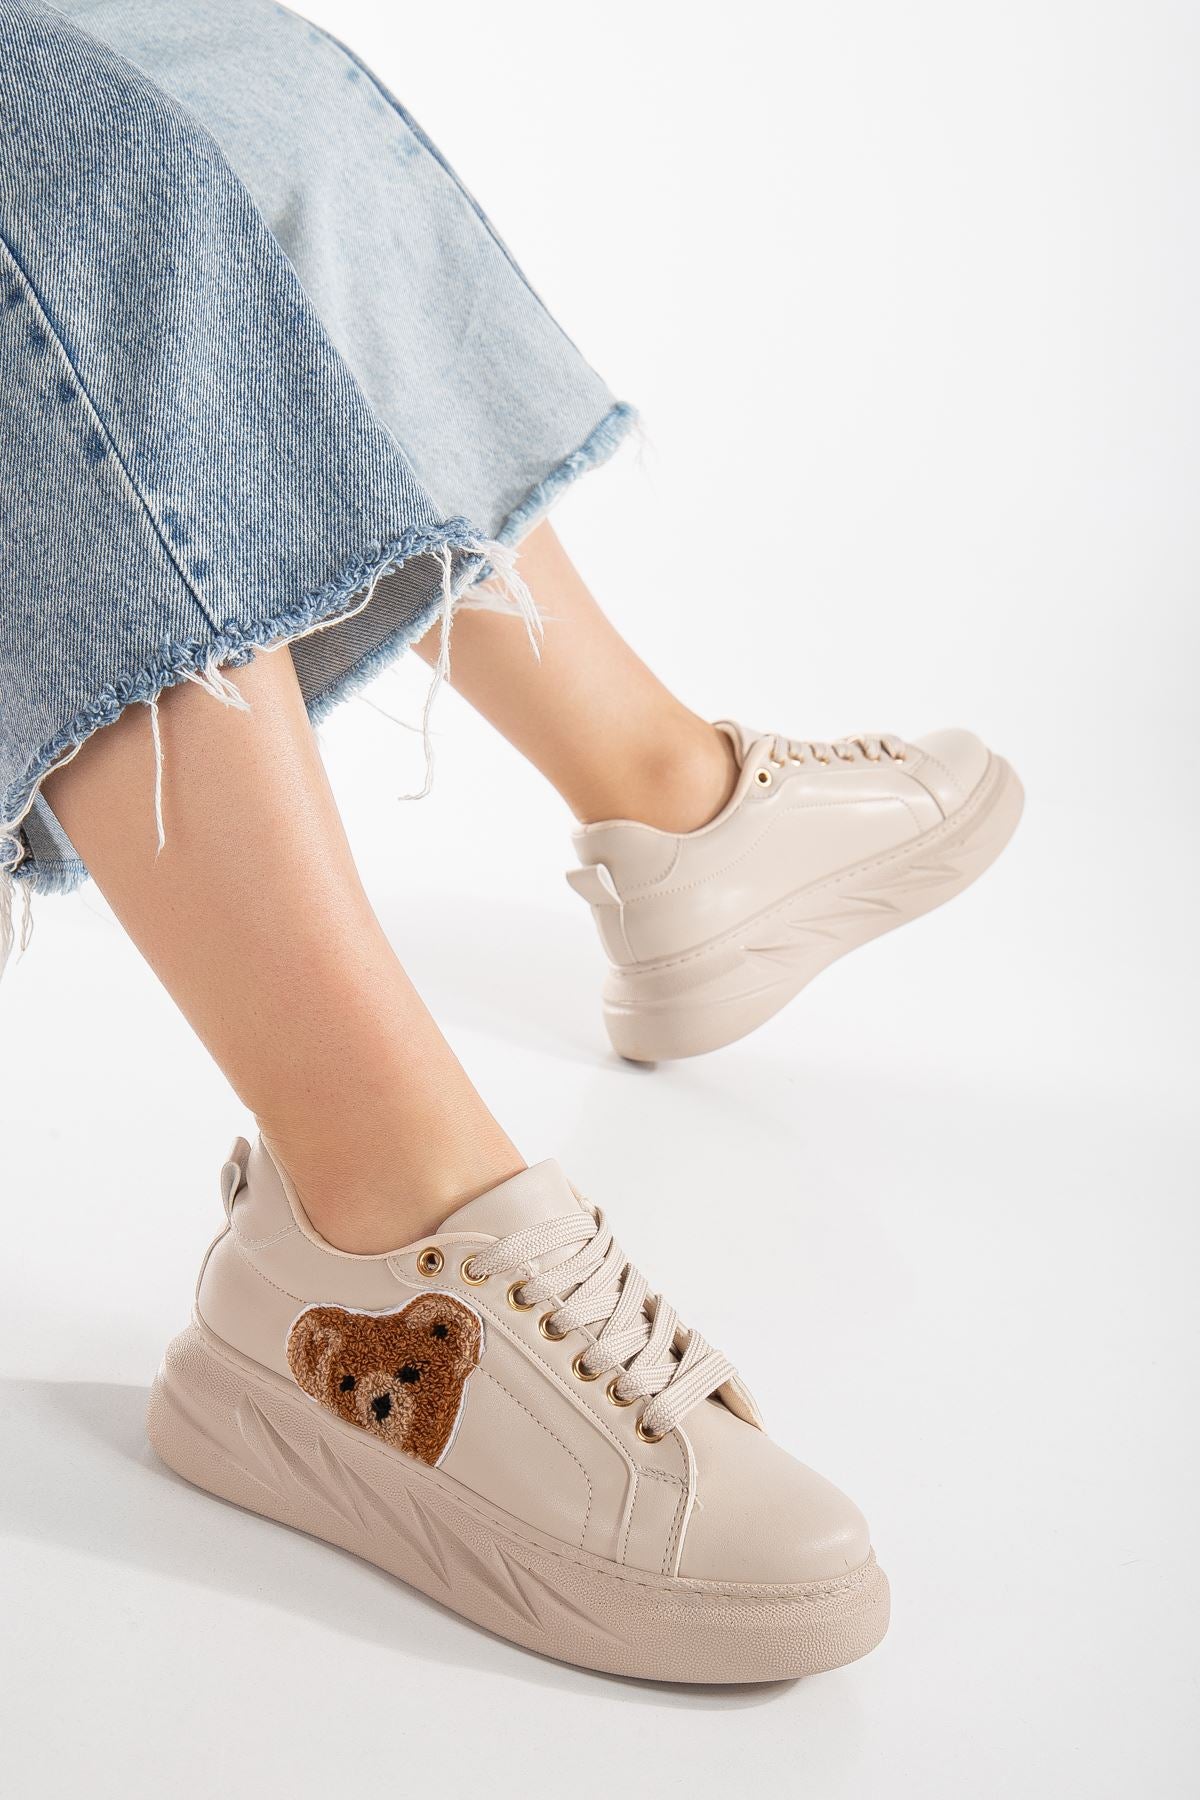 Women's Sianne Cream Thick Soled Sneakers with Teddy Bear Detail - STREETMODE ™